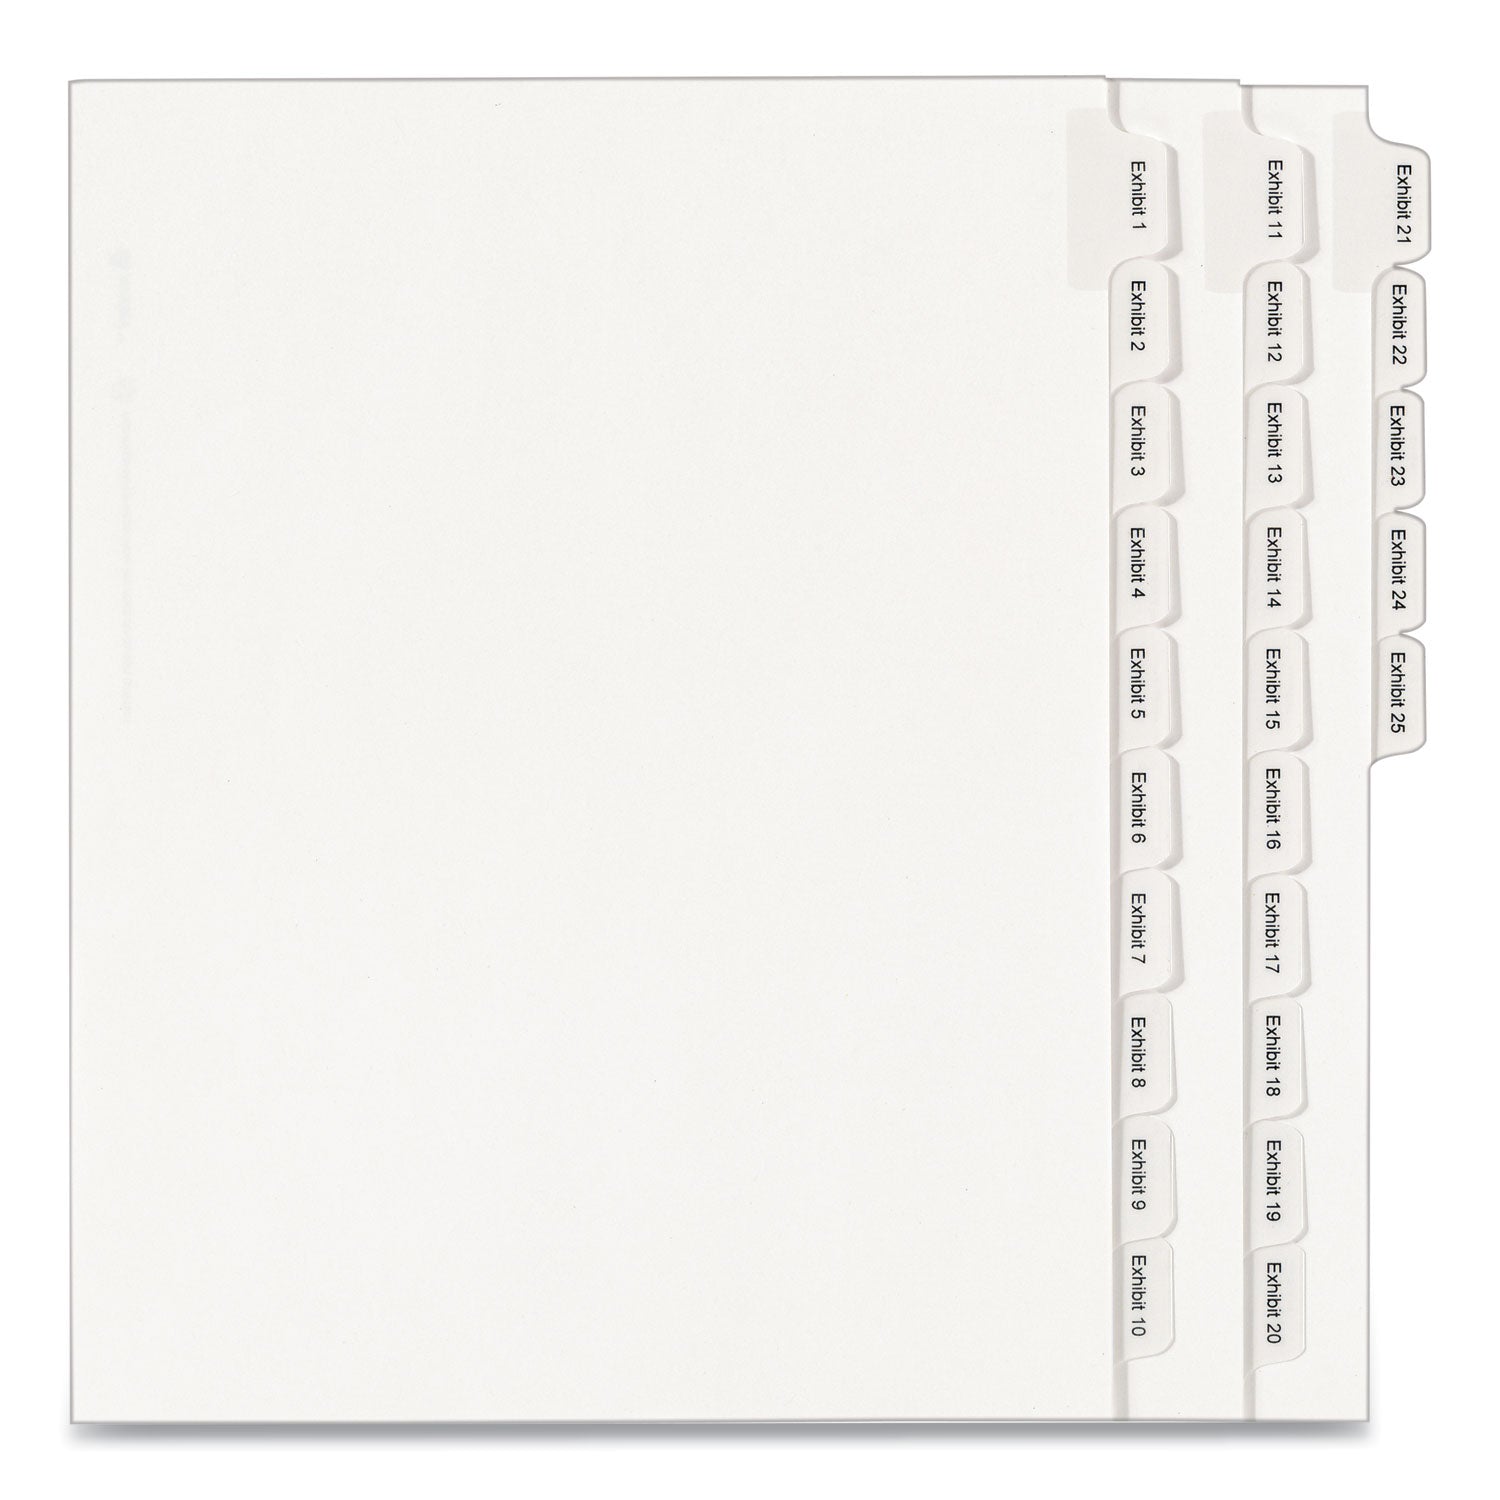 Preprinted Legal Exhibit Side Tab Index Dividers, Allstate Style, 25-Tab, Exhibit 1 to Exhibit 25, 11 x 8.5, White, 1 Set - 